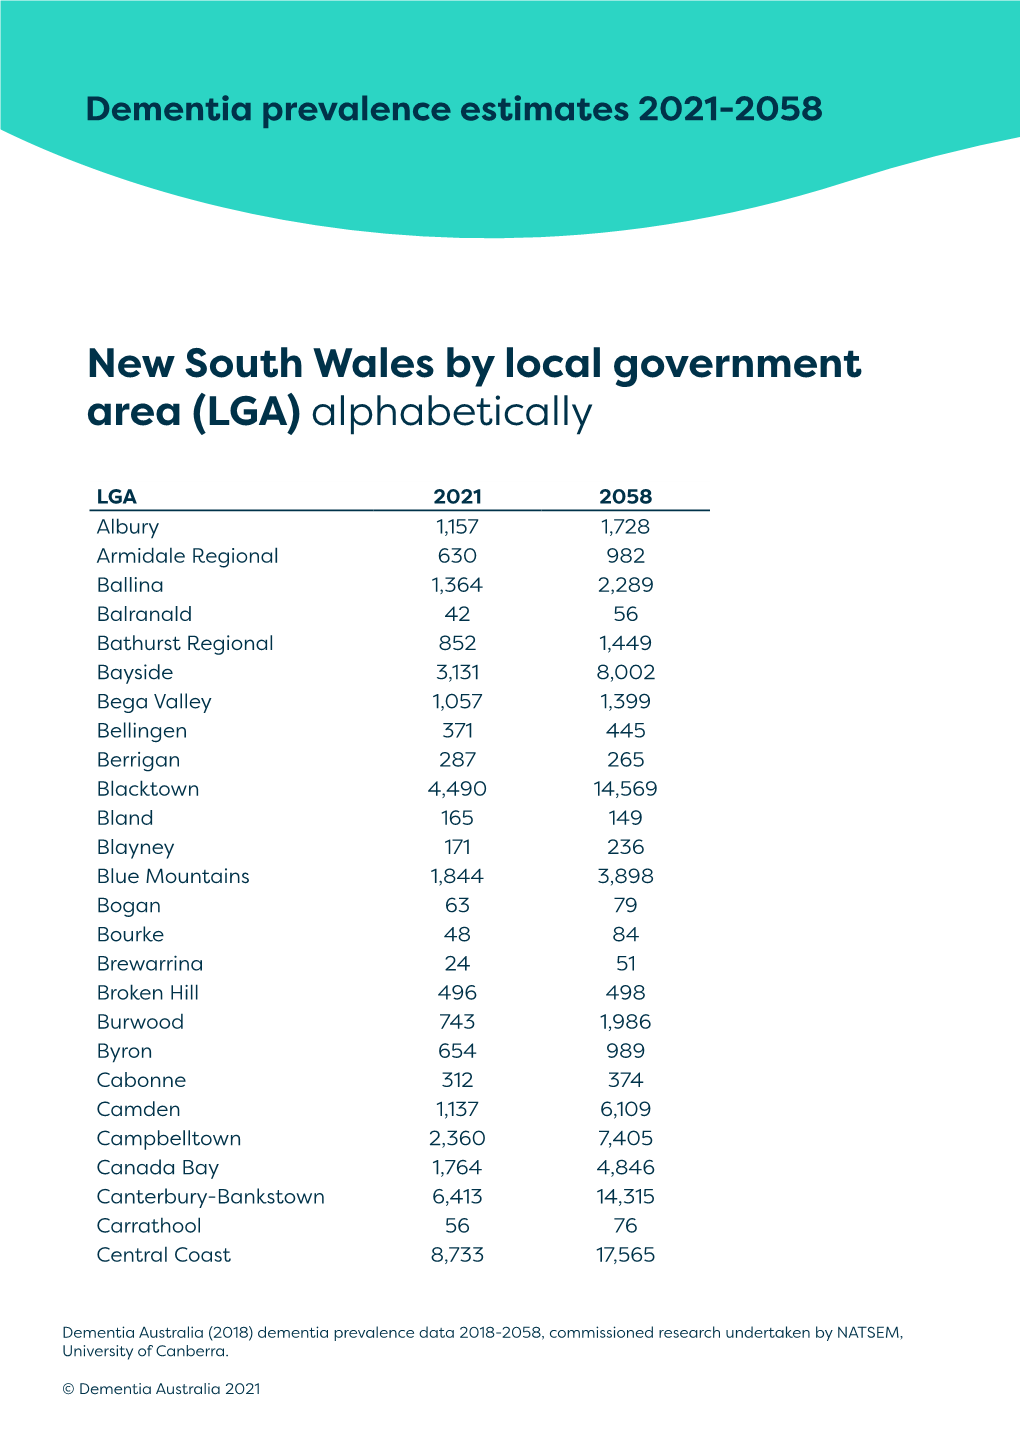 New South Wales by Local Government Area (LGA) Alphabetically